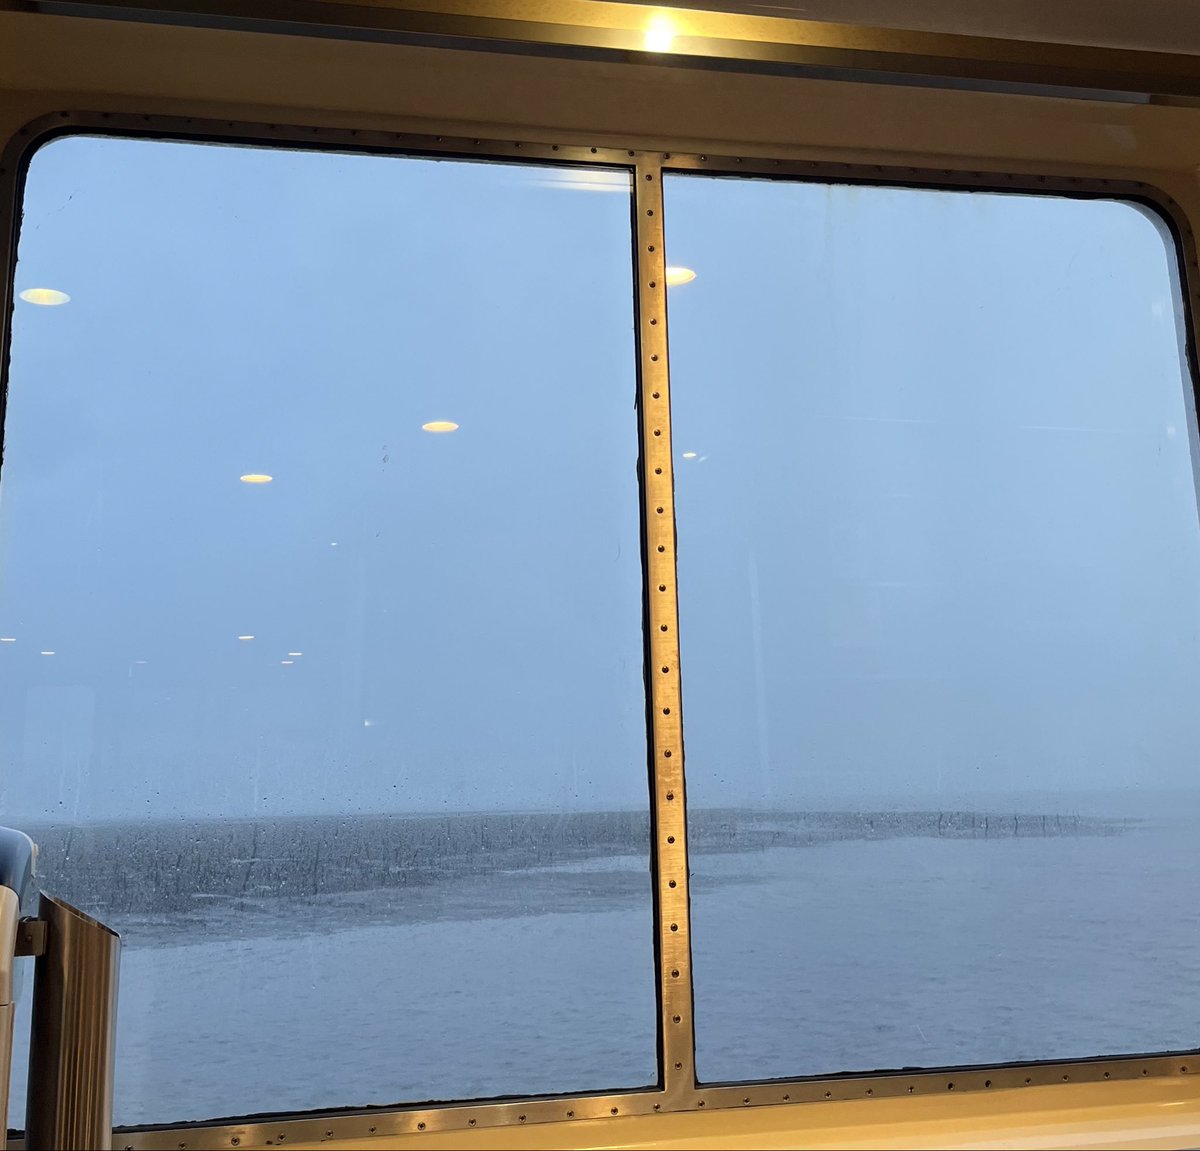 Gloomy ferry crossing home following a great first week with @Southern_NHSFT thank you @hullpj @SvH_quality @susannarayner78 @JoPerry4334 for making this week such a positive experience- looking forward to working with you all 😊